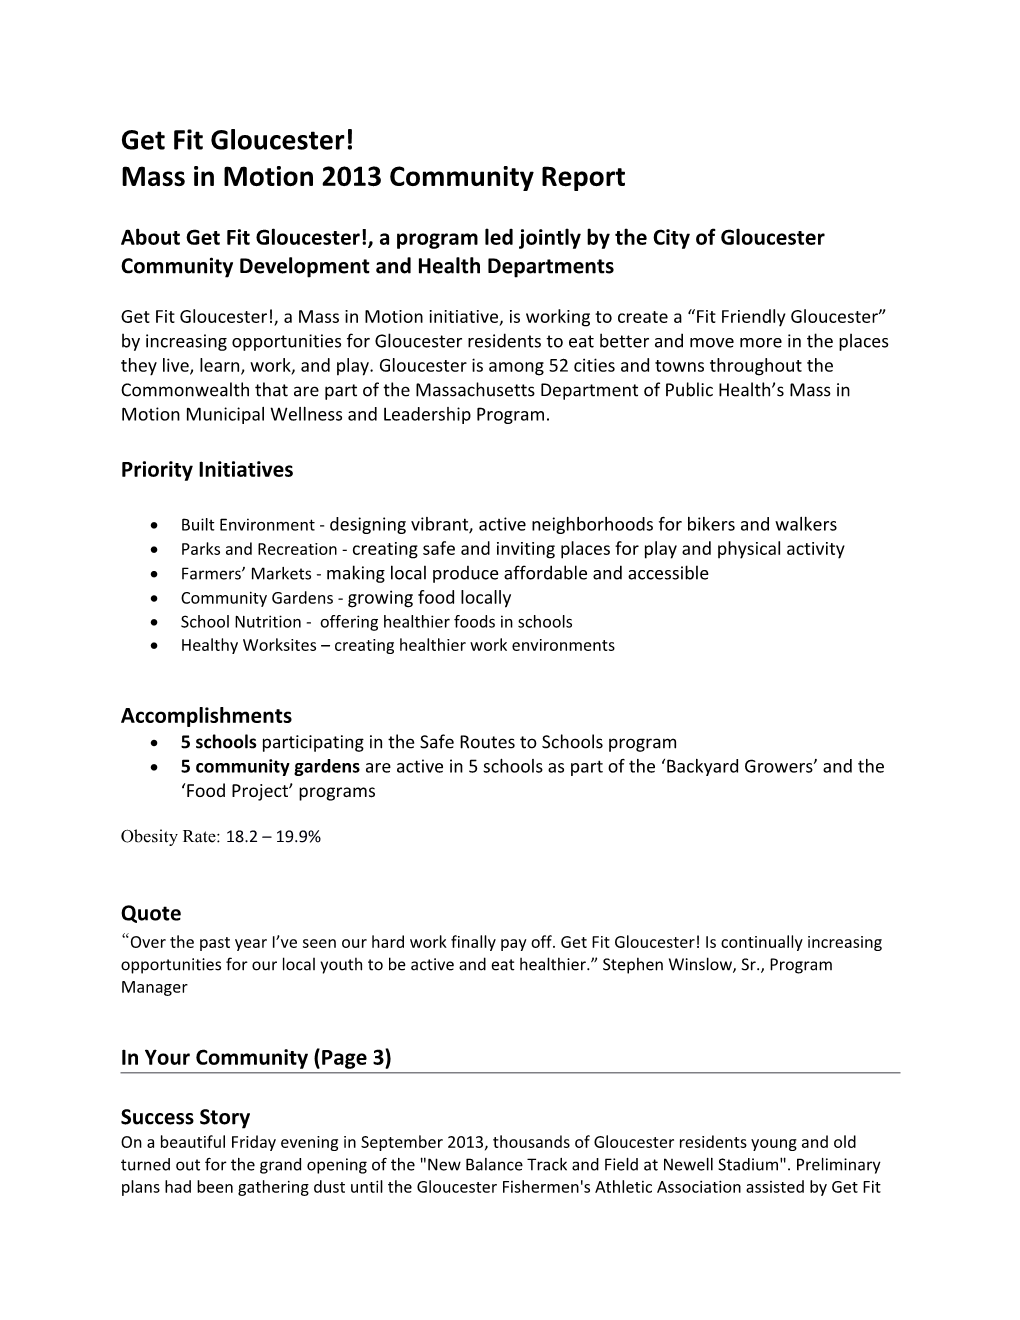 Get Fit Gloucester! Mass in Motion 2013 Community Report